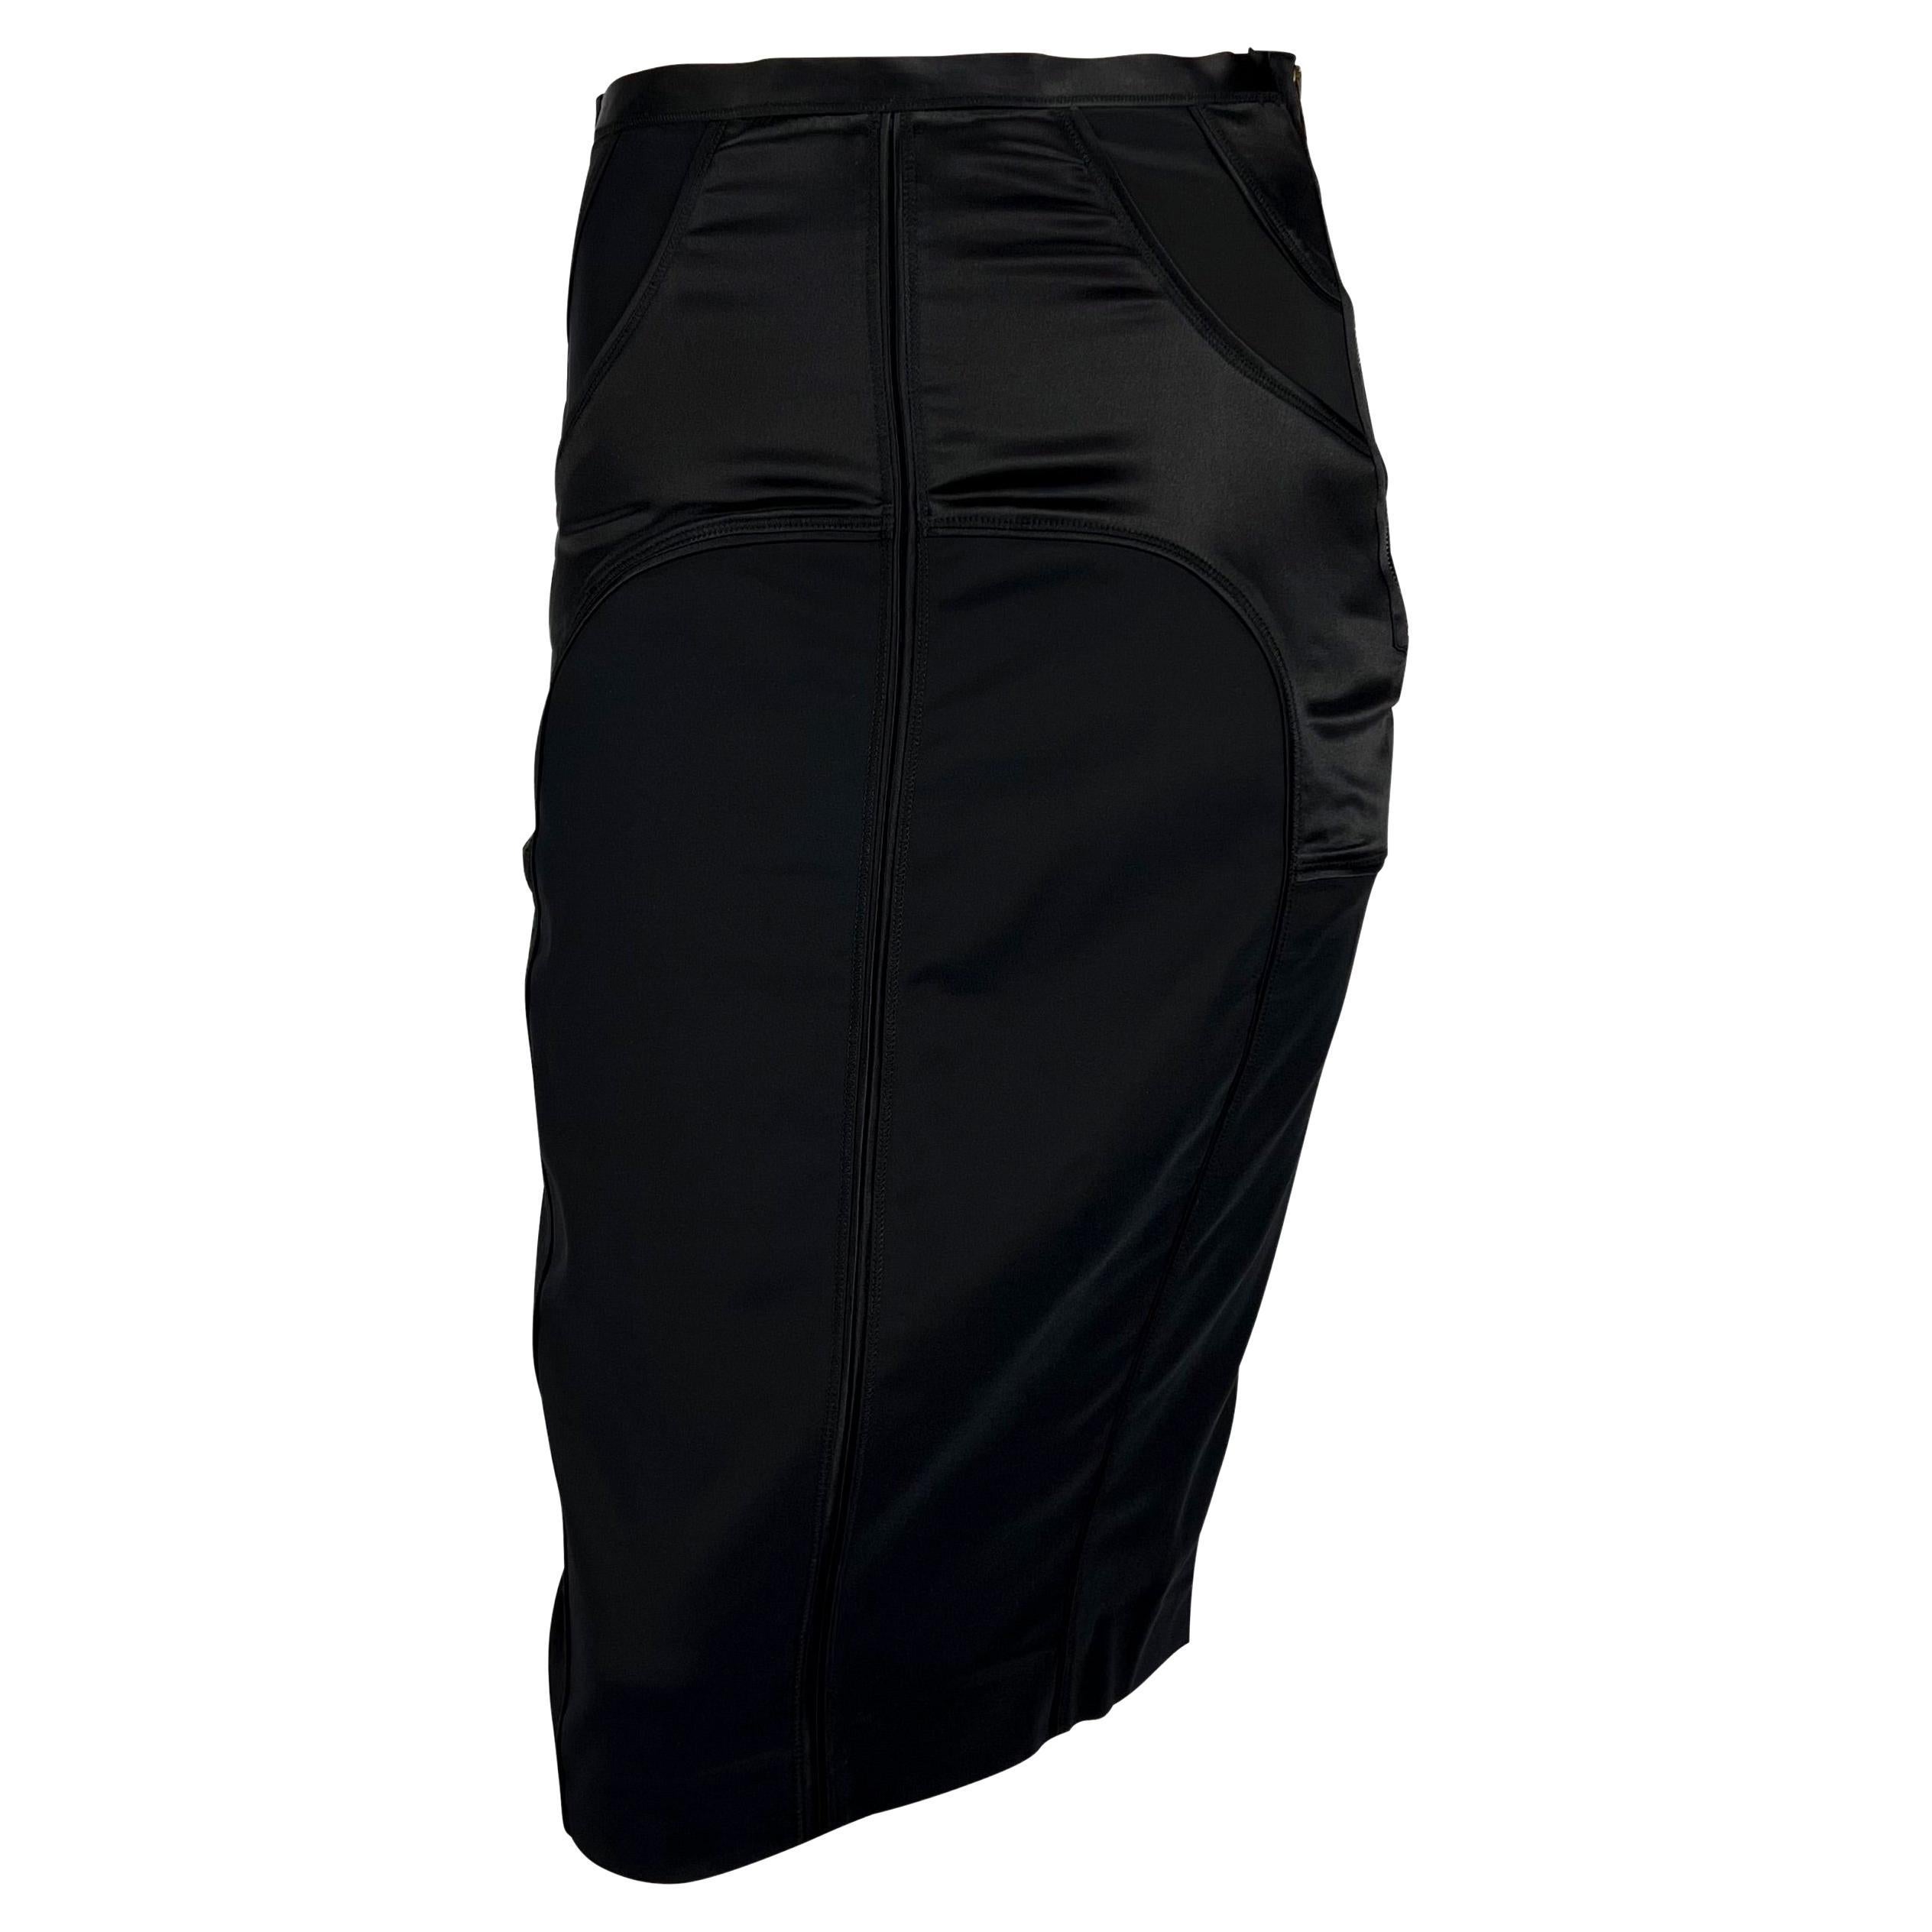 F/W 2003 Gucci by Tom Ford Black Satin Panel Zip Stretch Skirt For Sale 4